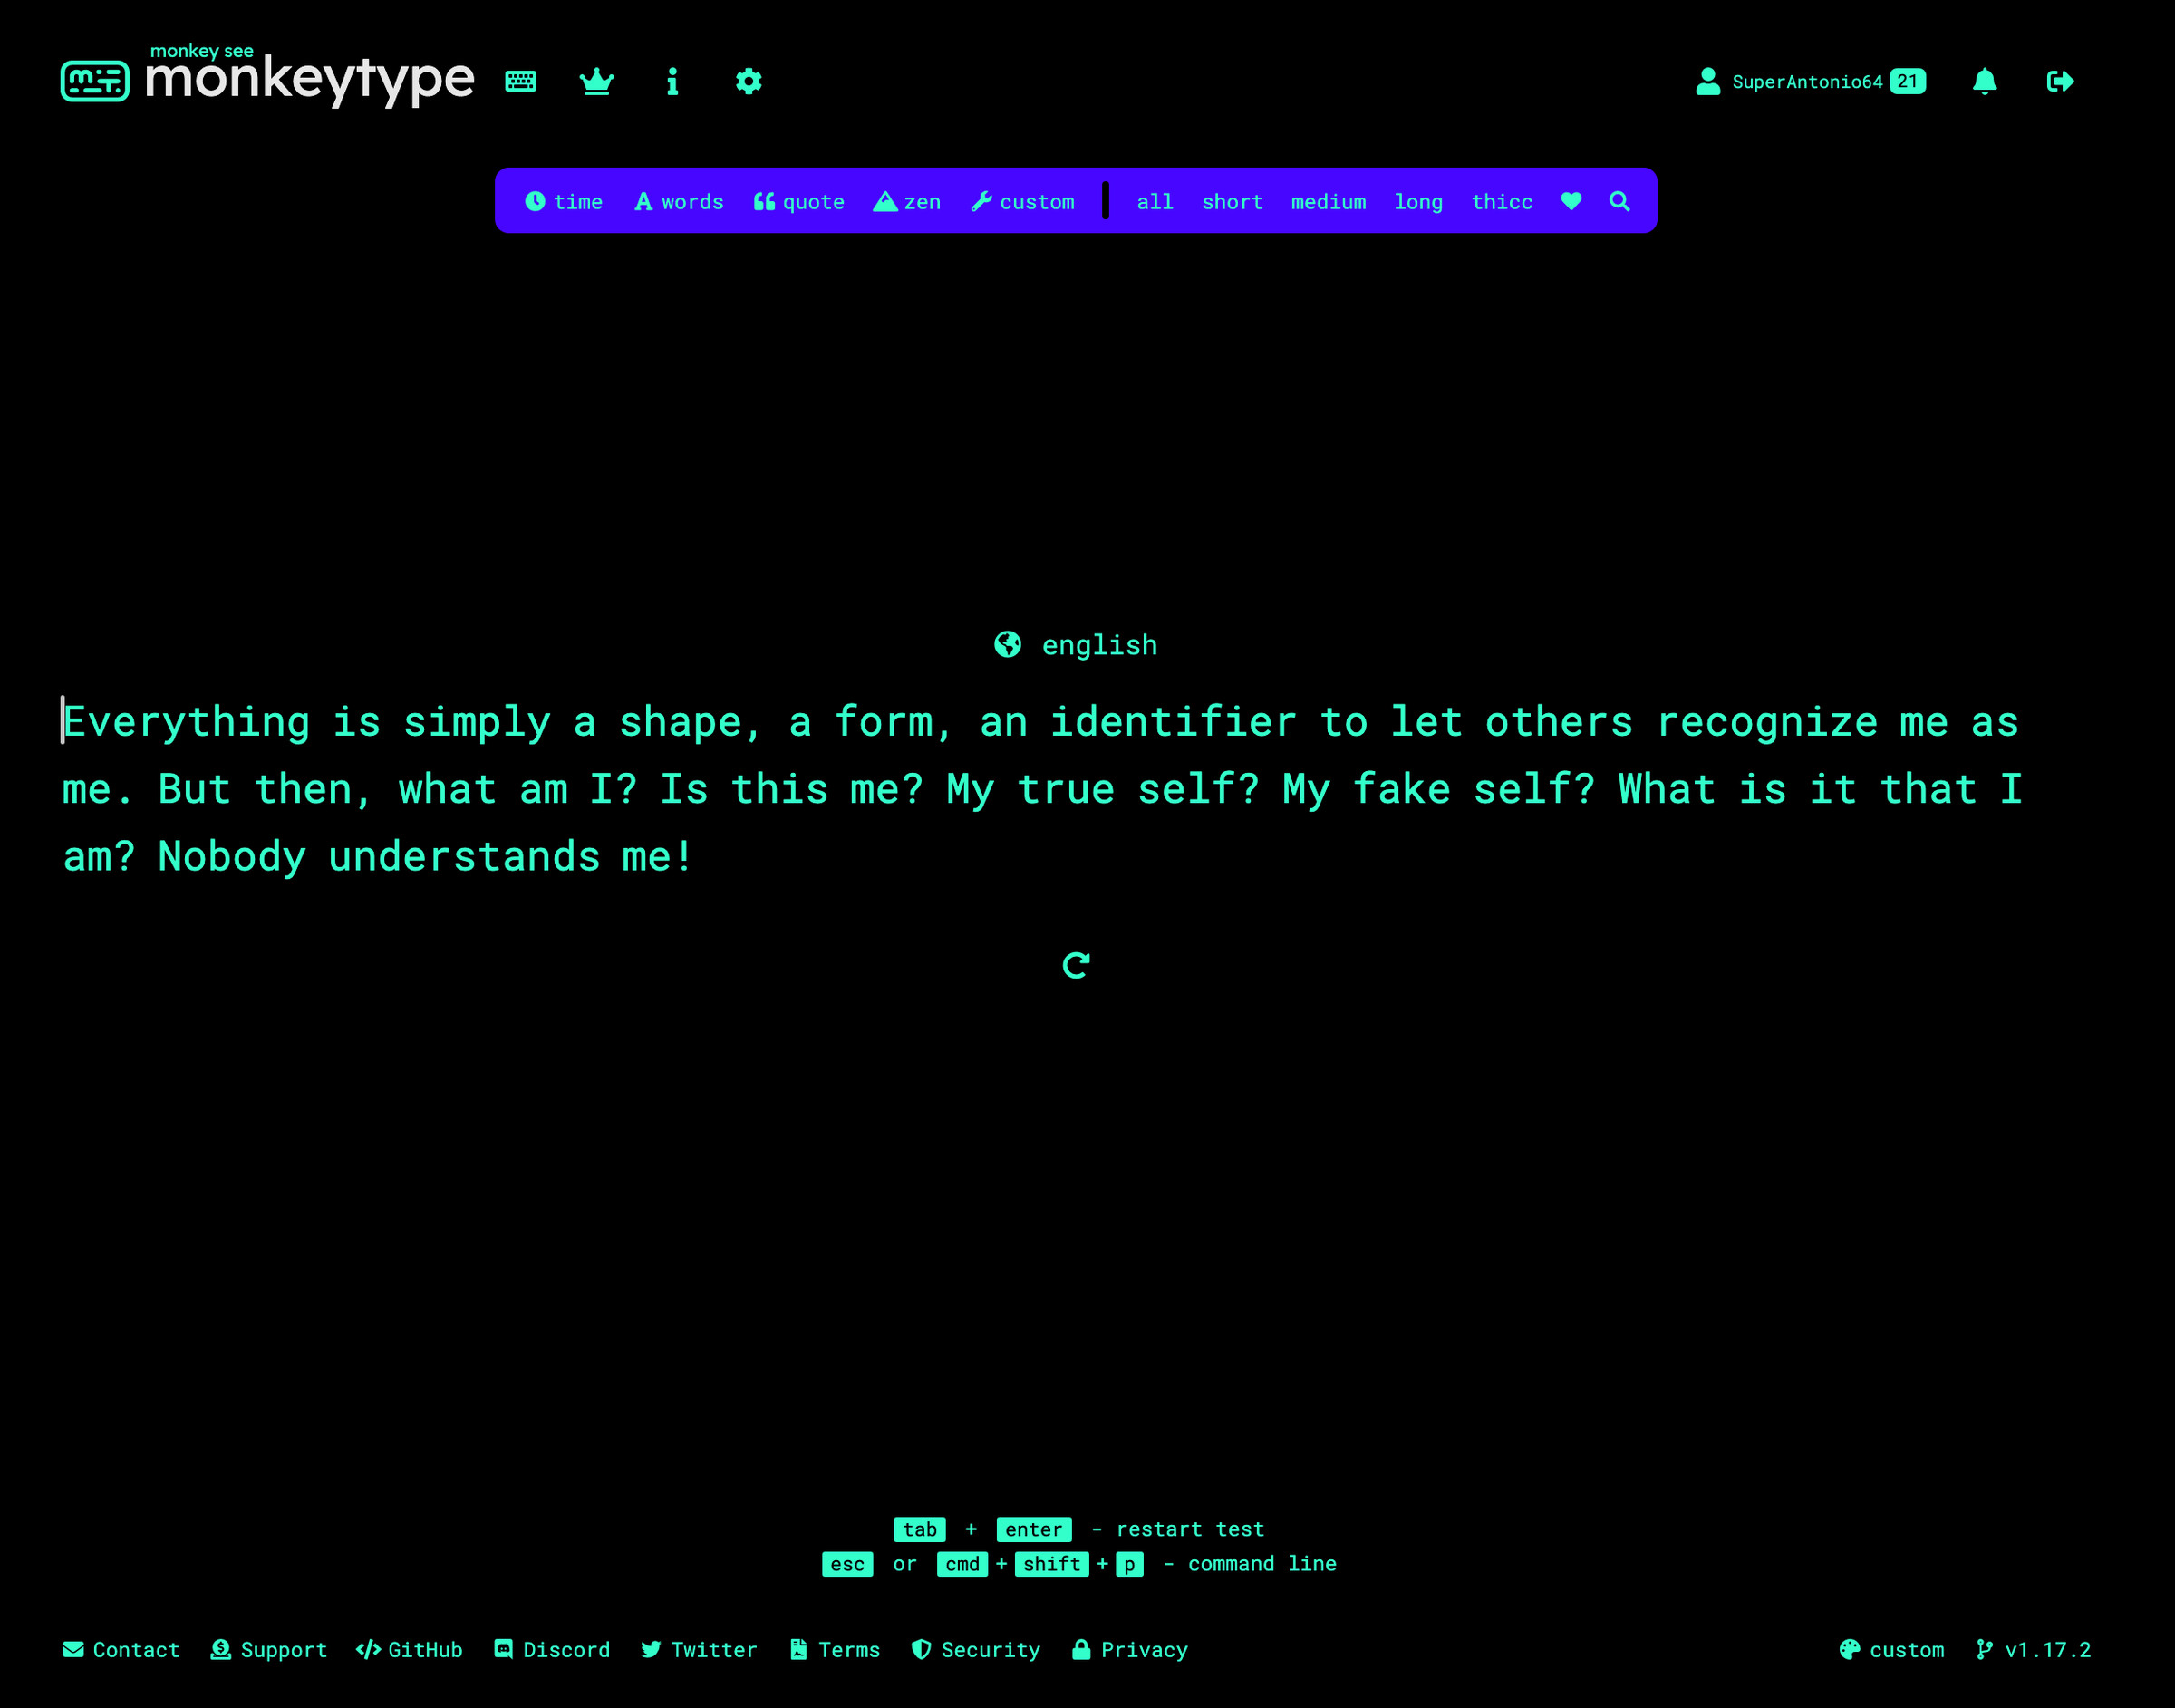 Monkeytype offers myriad controls for custom-tailoring your typing lessons. For example, I’ve themed mine with Verge colors (which you can use, too), while that user-submitted text prompt is from the anime Neon Genesis Evangelion.